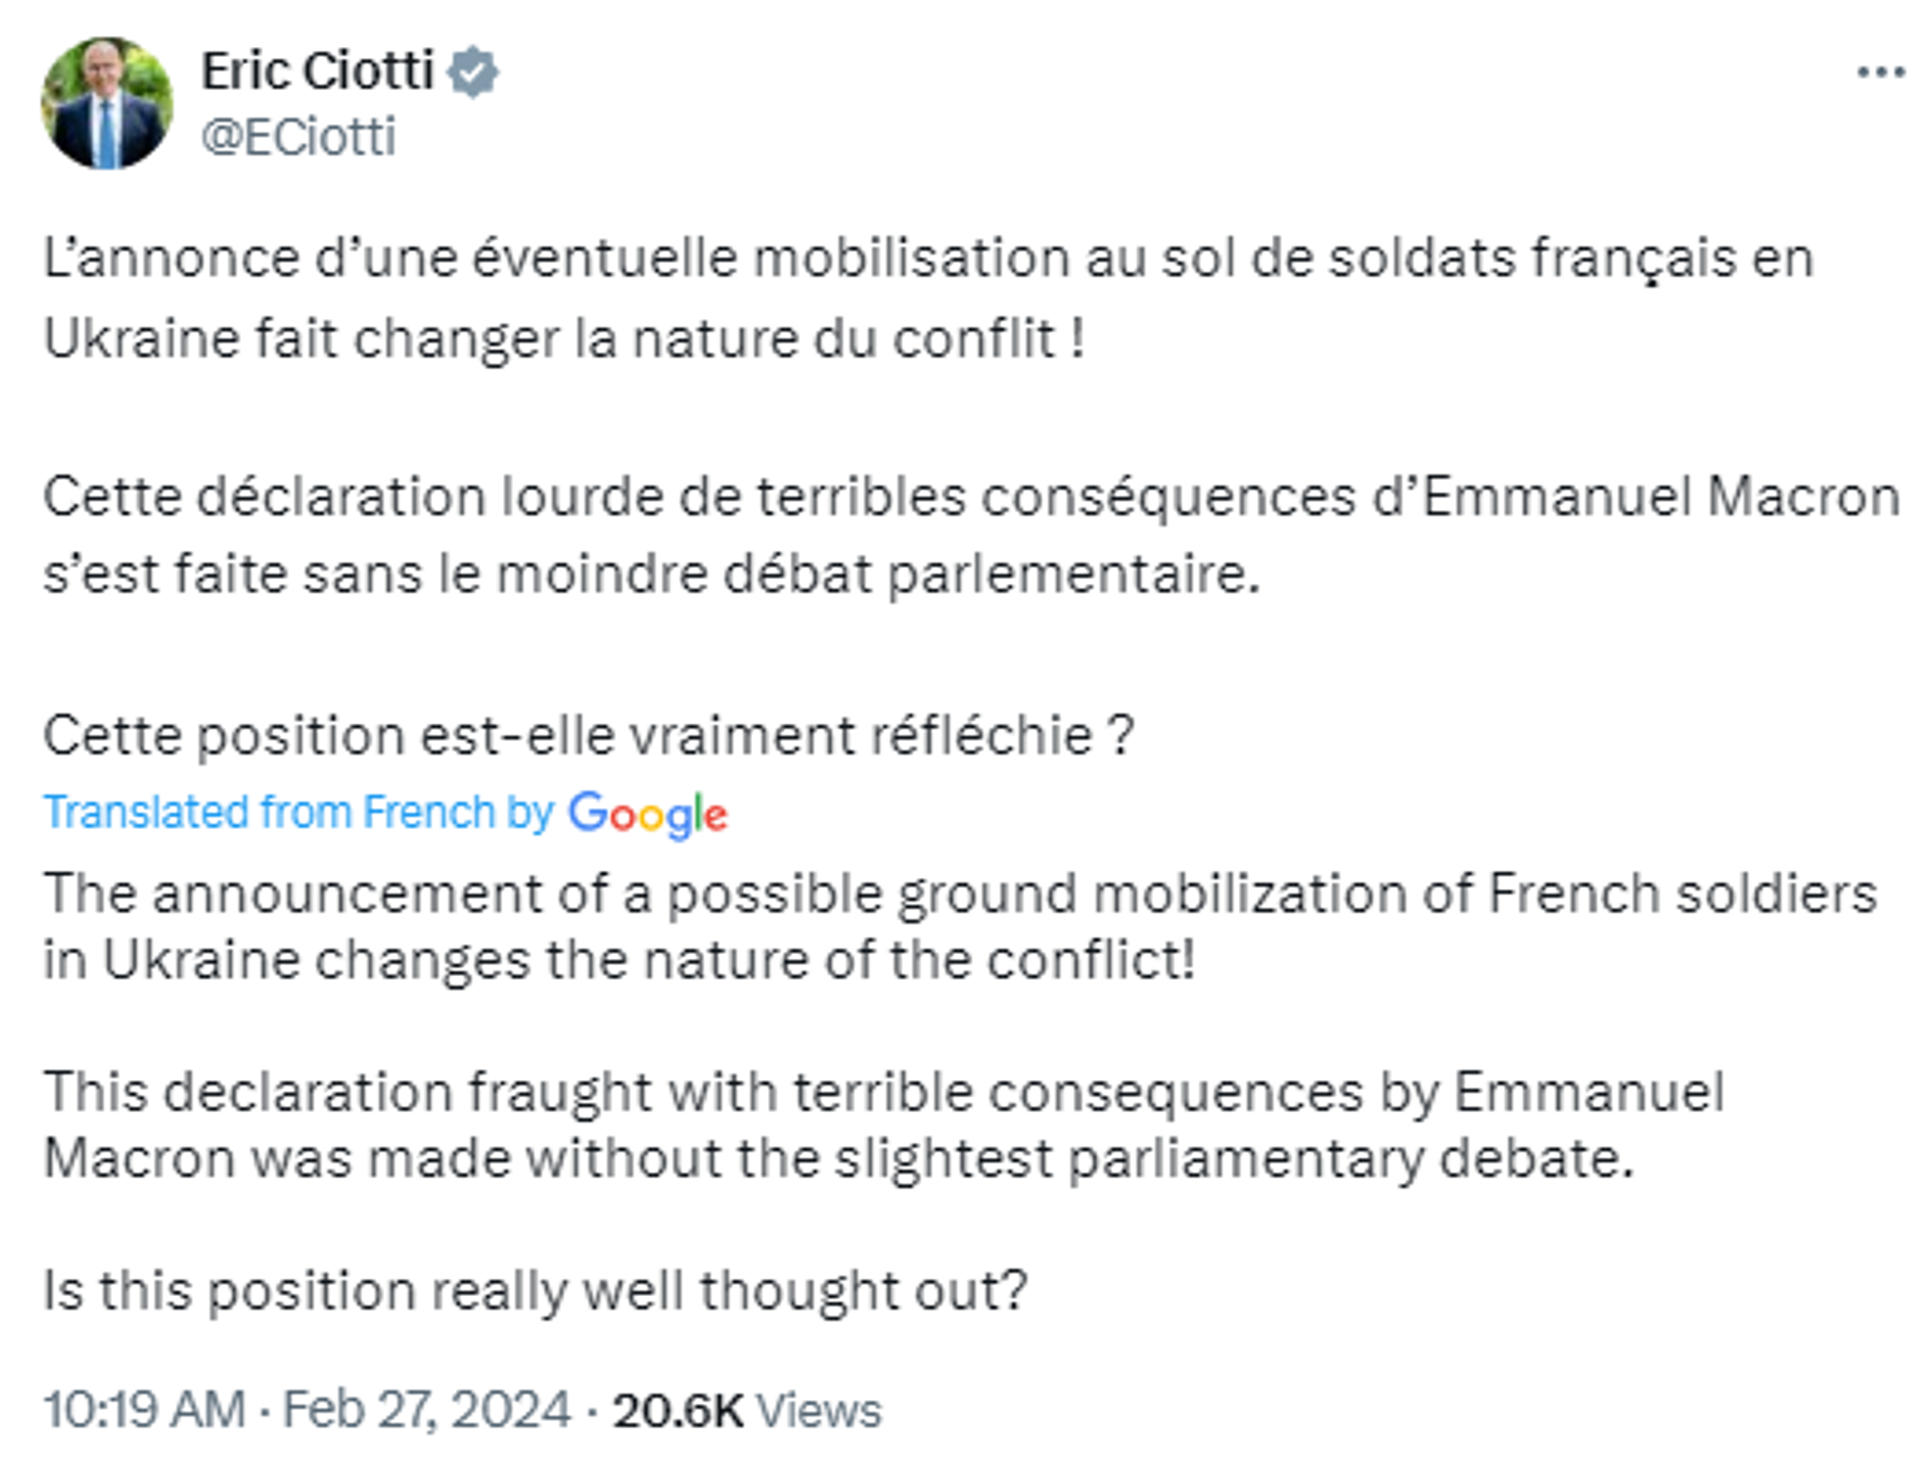 Screenshot of X post by Eric Ciotti, French politician, leader of the liberal-conservative The Republicans (LR) party. - Sputnik International, 1920, 27.02.2024